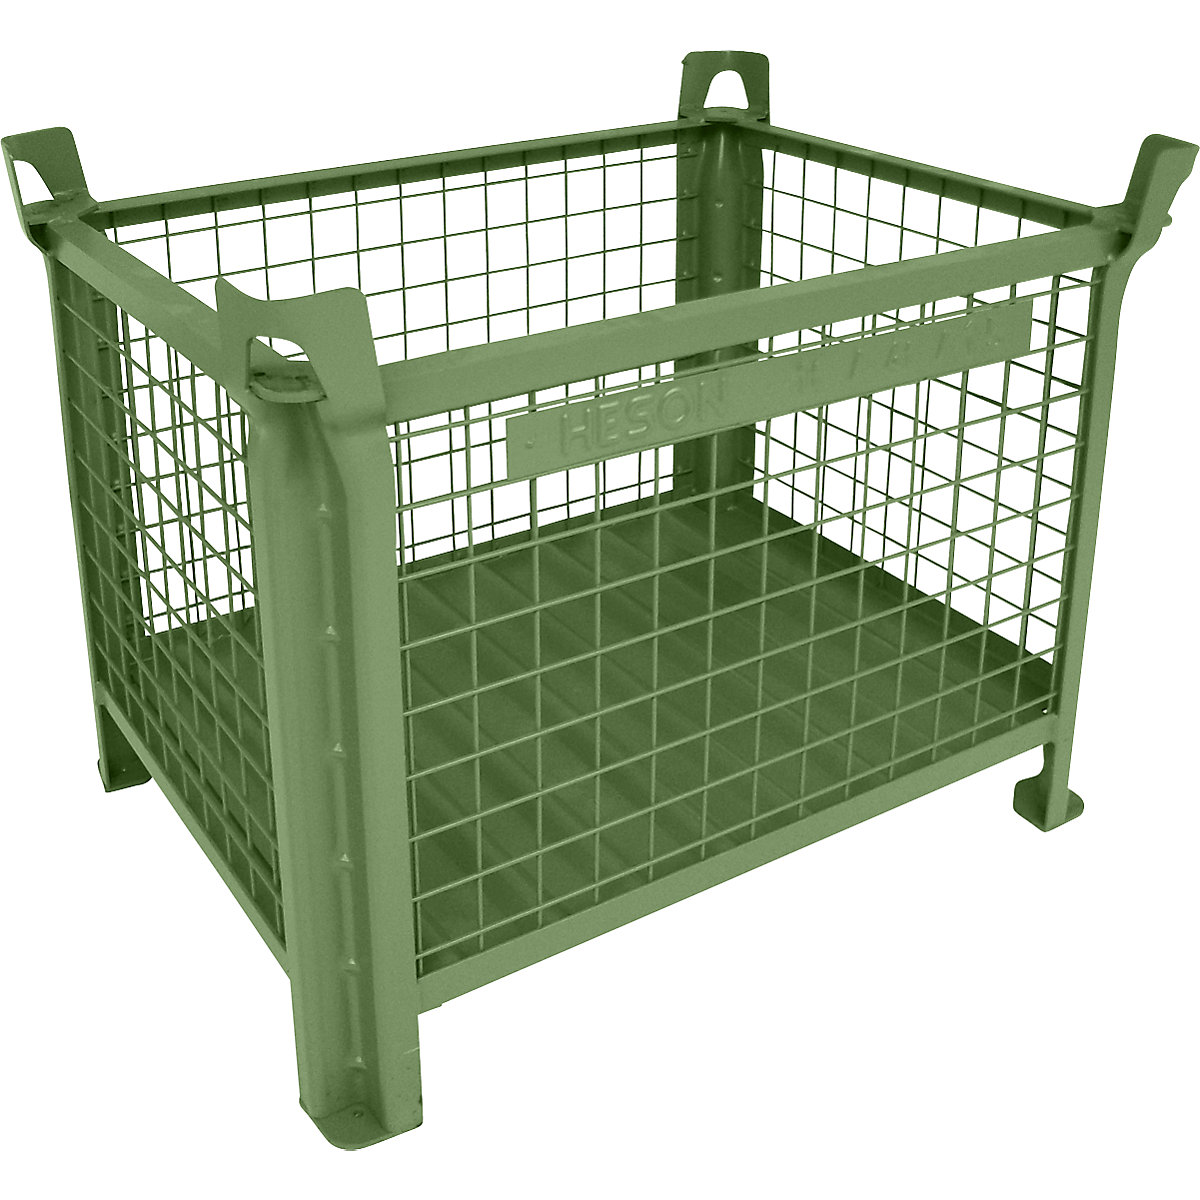 Box pallet with sheet steel base – Heson, LxW 800 x 600 mm, painted green-6